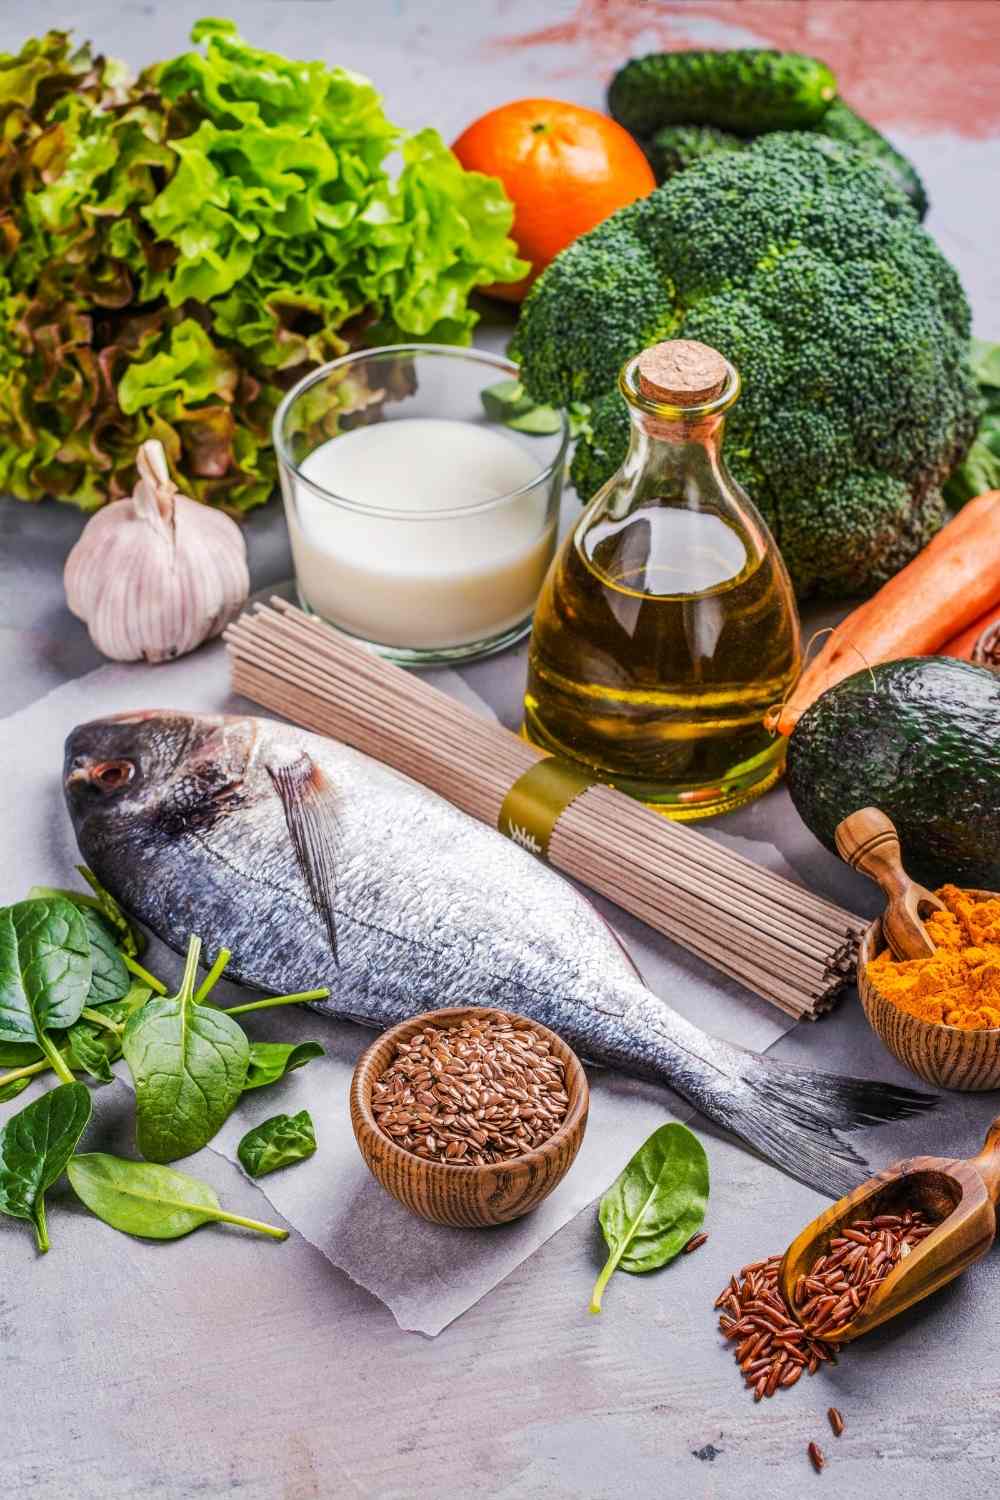 control inflammatory disorders with diet